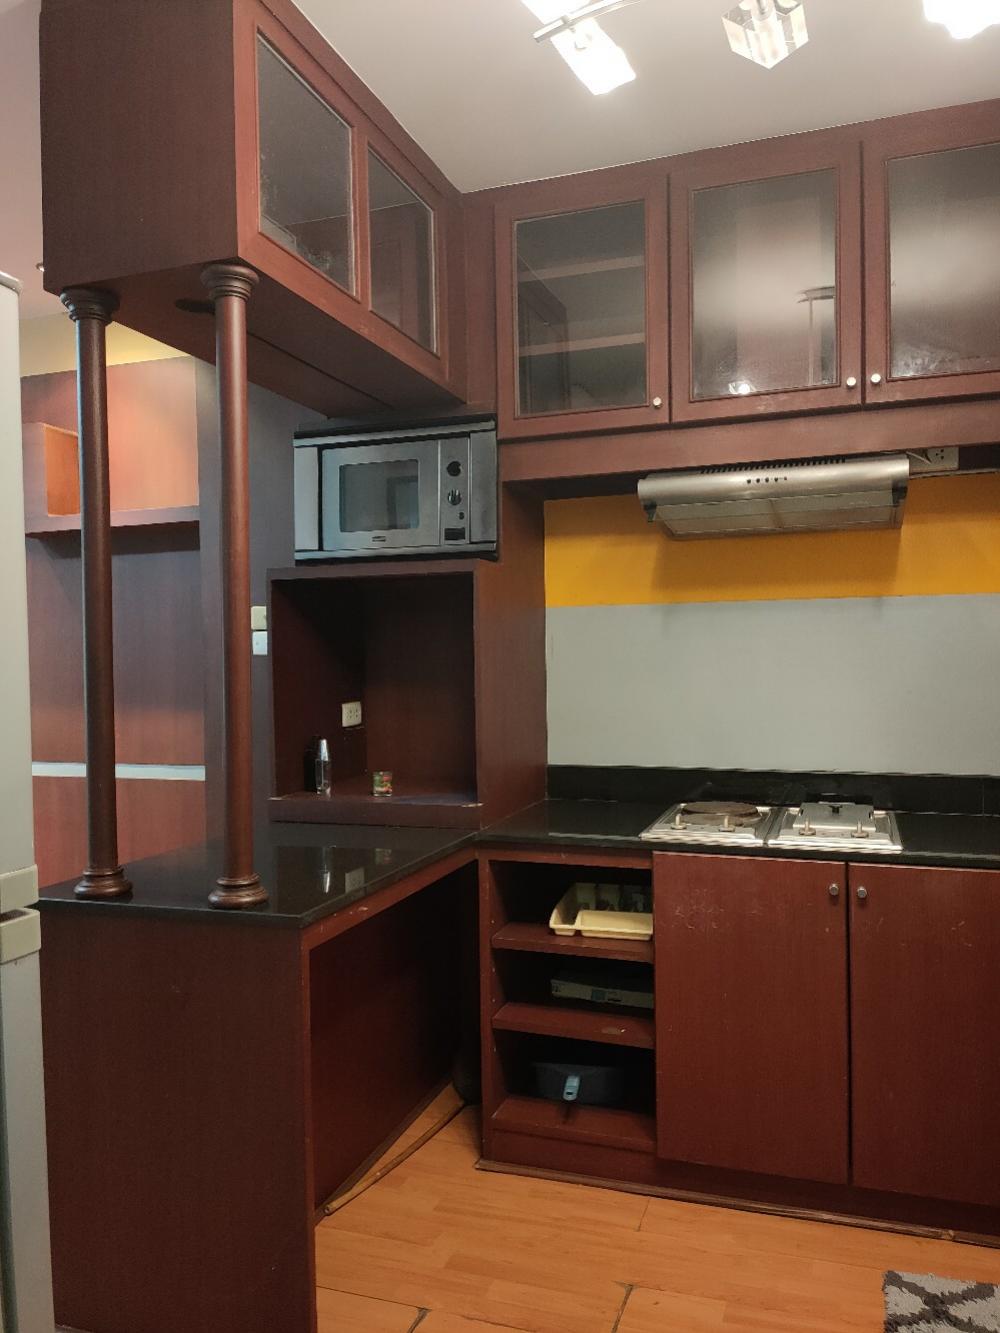 For SaleCondoBangna, Bearing, Lasalle : Condo for sale, The Parkland Bangna, 1 bedroom, built-in furniture throughout the room, very beautiful and livable.